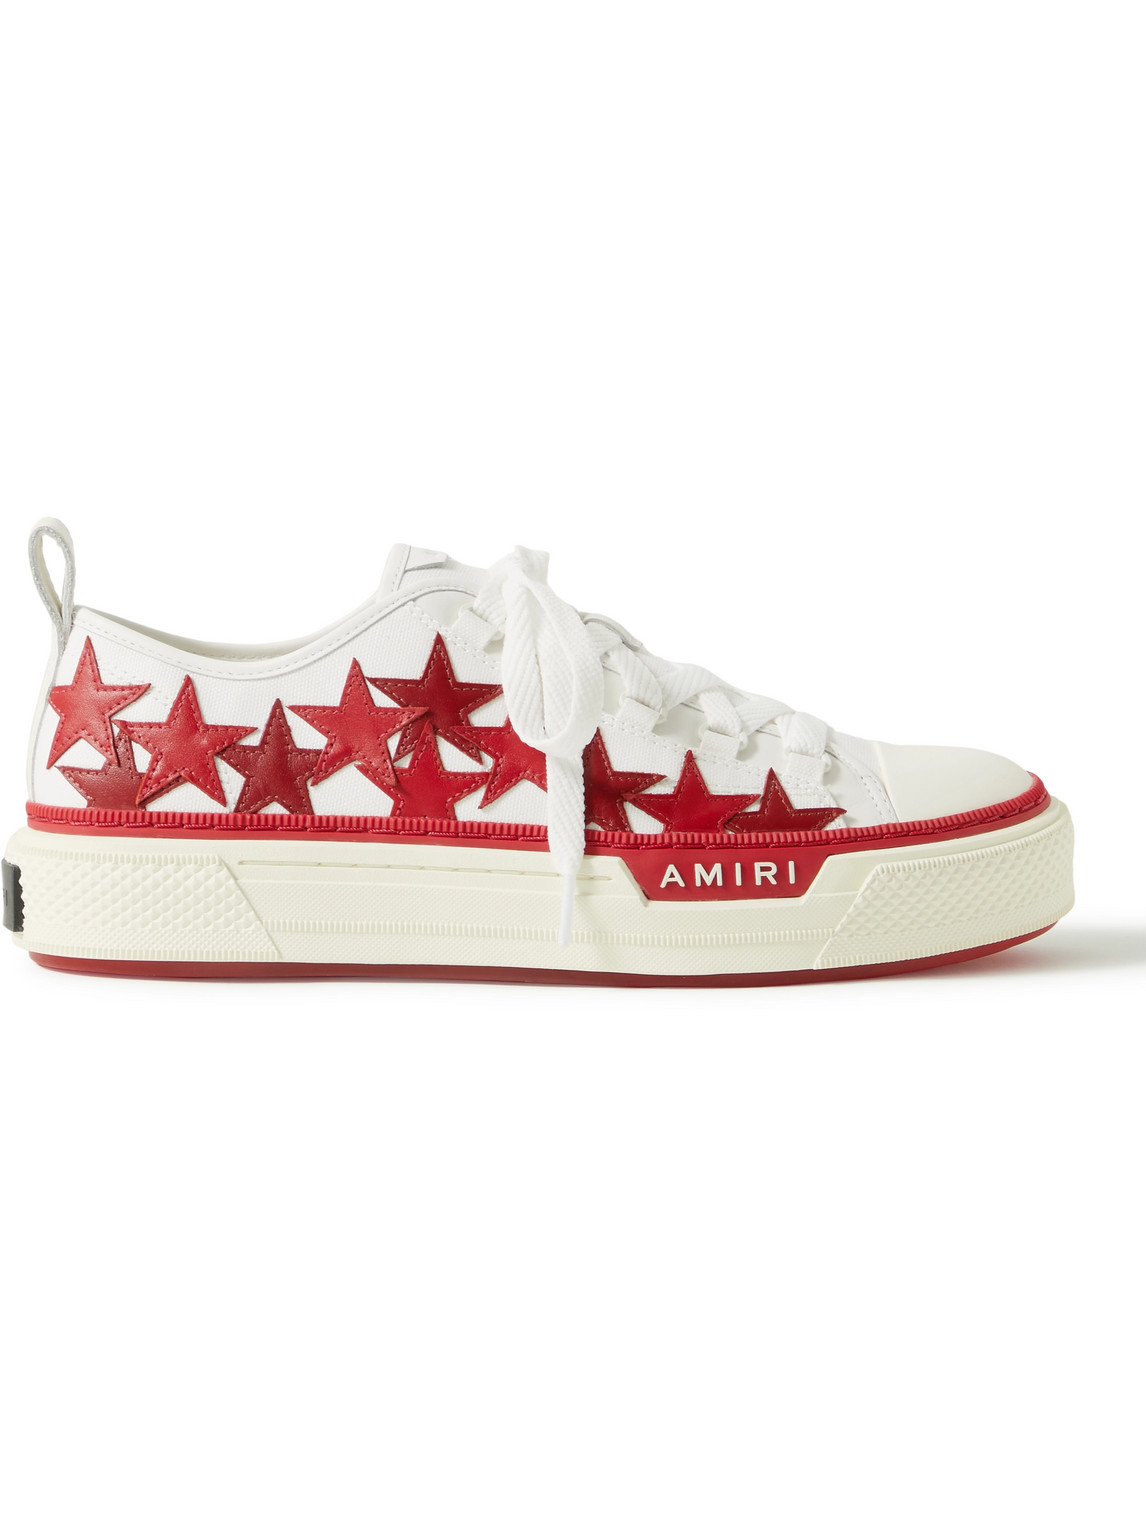 AMIRI APPLIQUÉD LEATHER AND CANVAS SNEAKERS